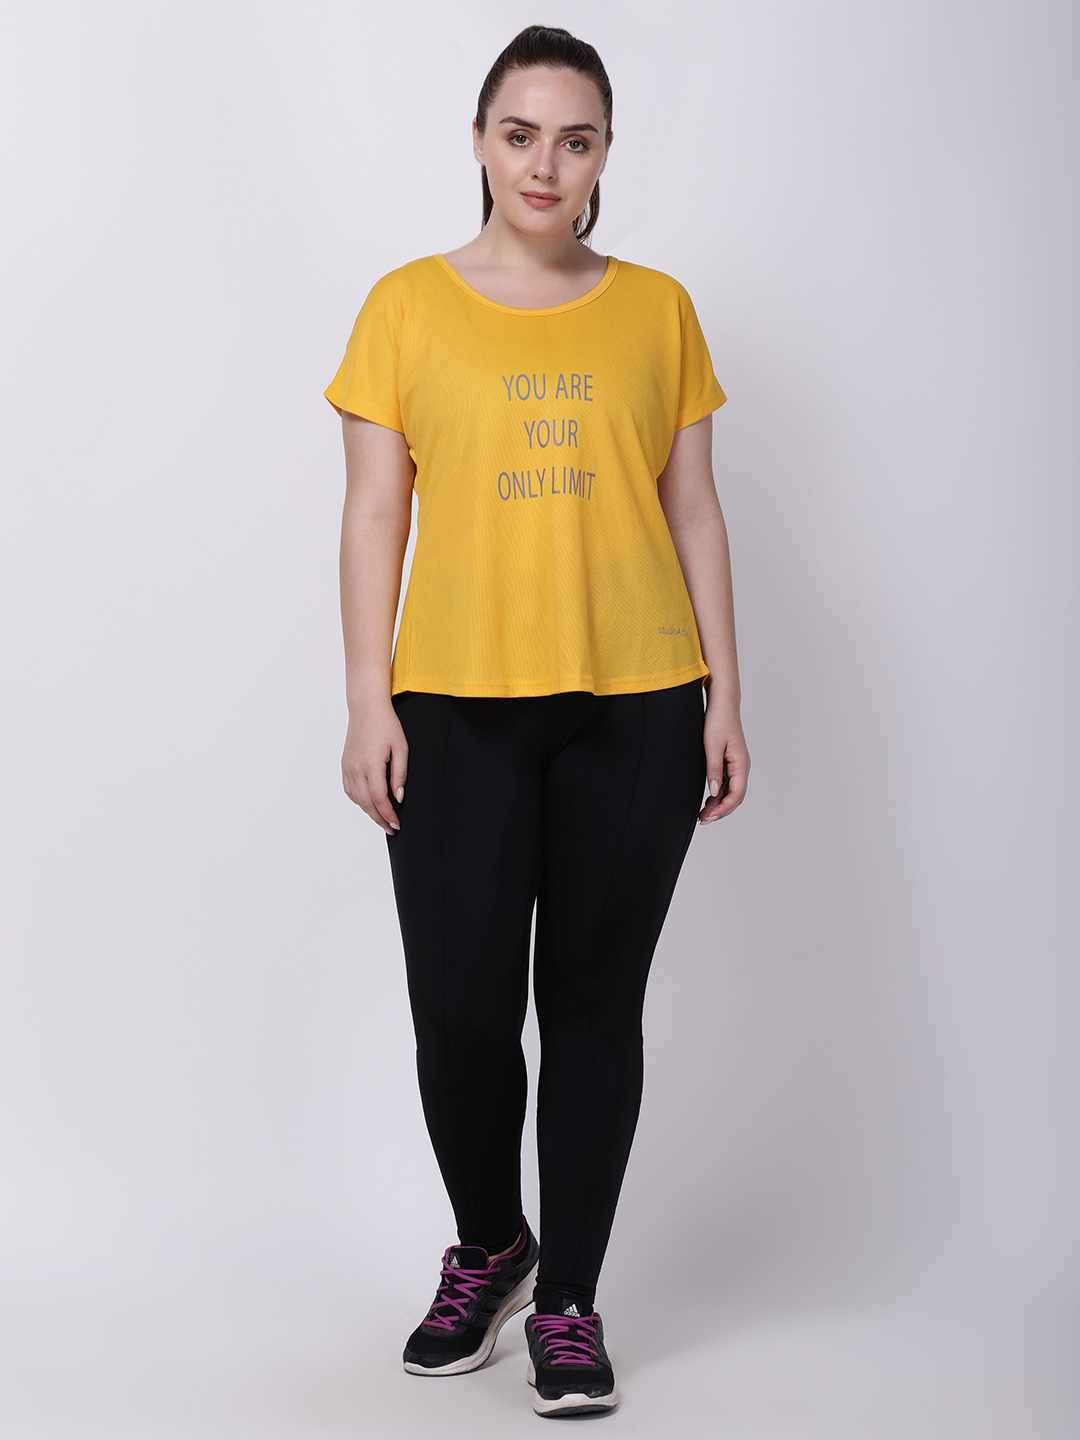 Gold I-Have-Your-Back Tee